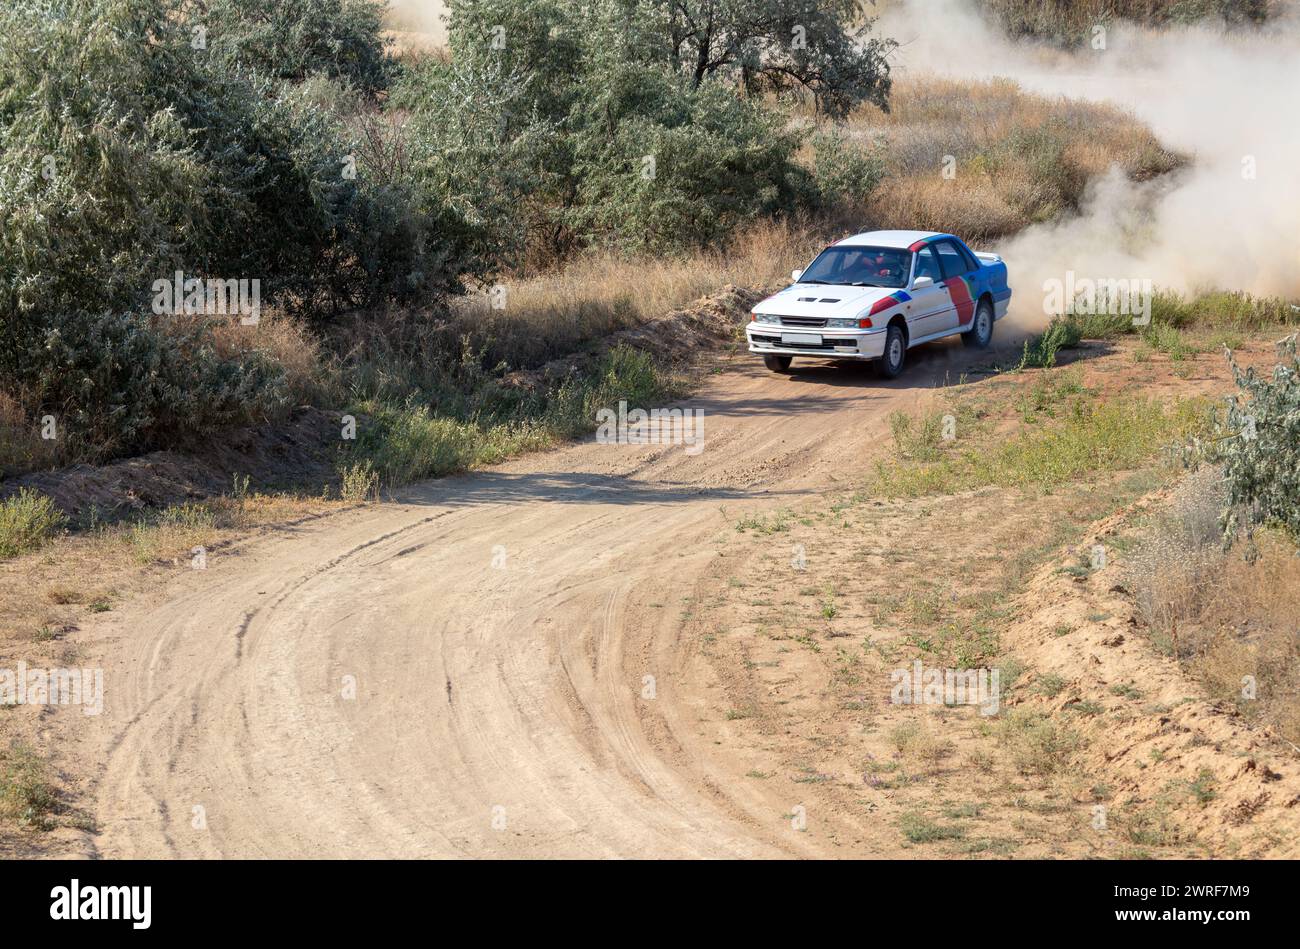 Sunny summer day. Dusty rally track. A rally car makes a lot of dust in a turn 20 Stock Photo